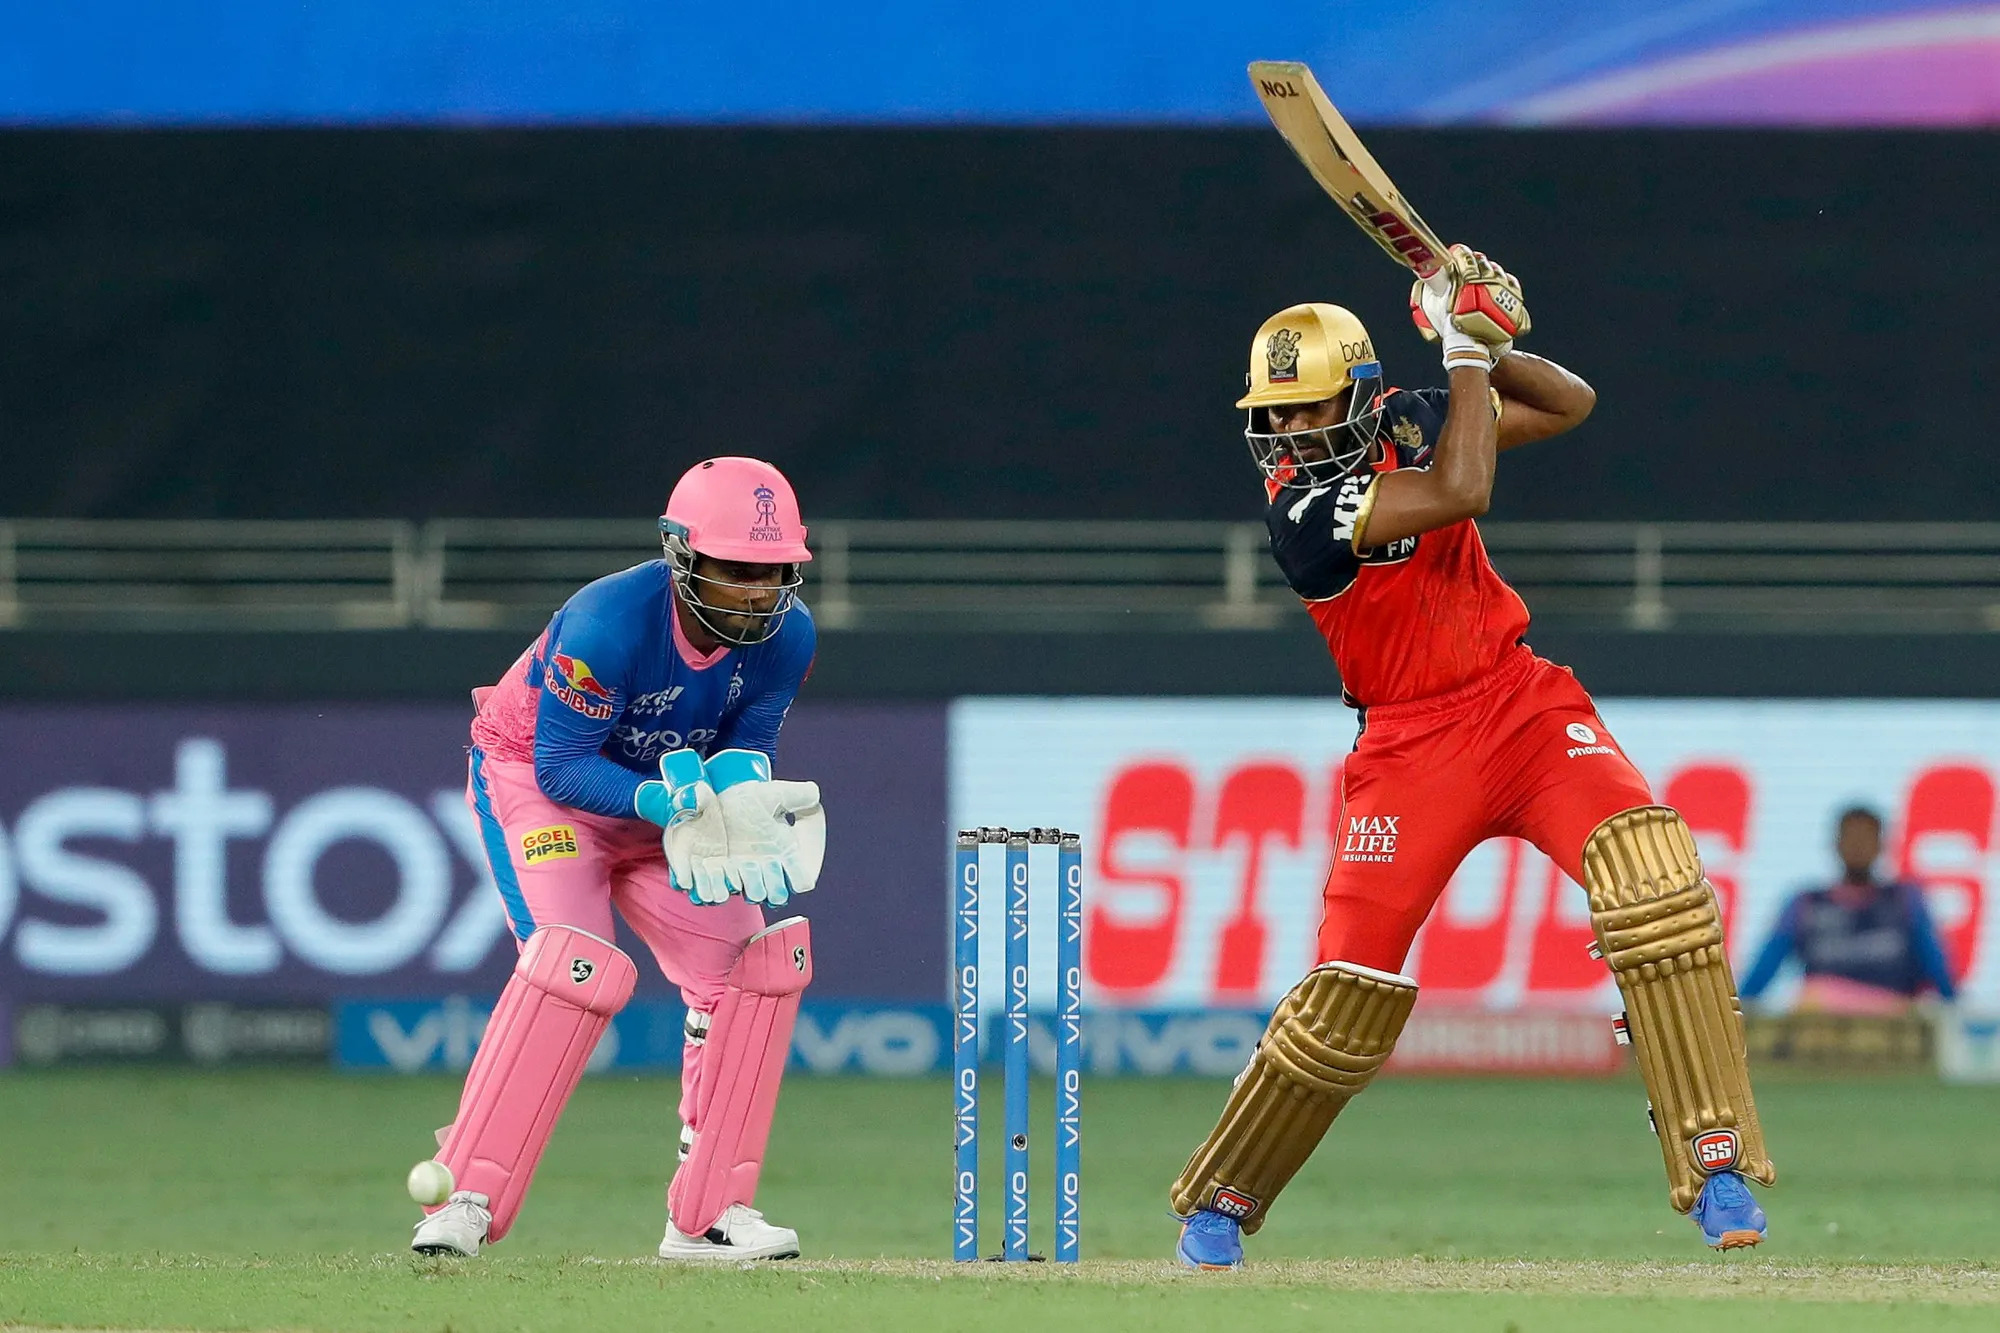 Knockout stage: Ups and downs as IPL2021 games enter a decisive stage of this season